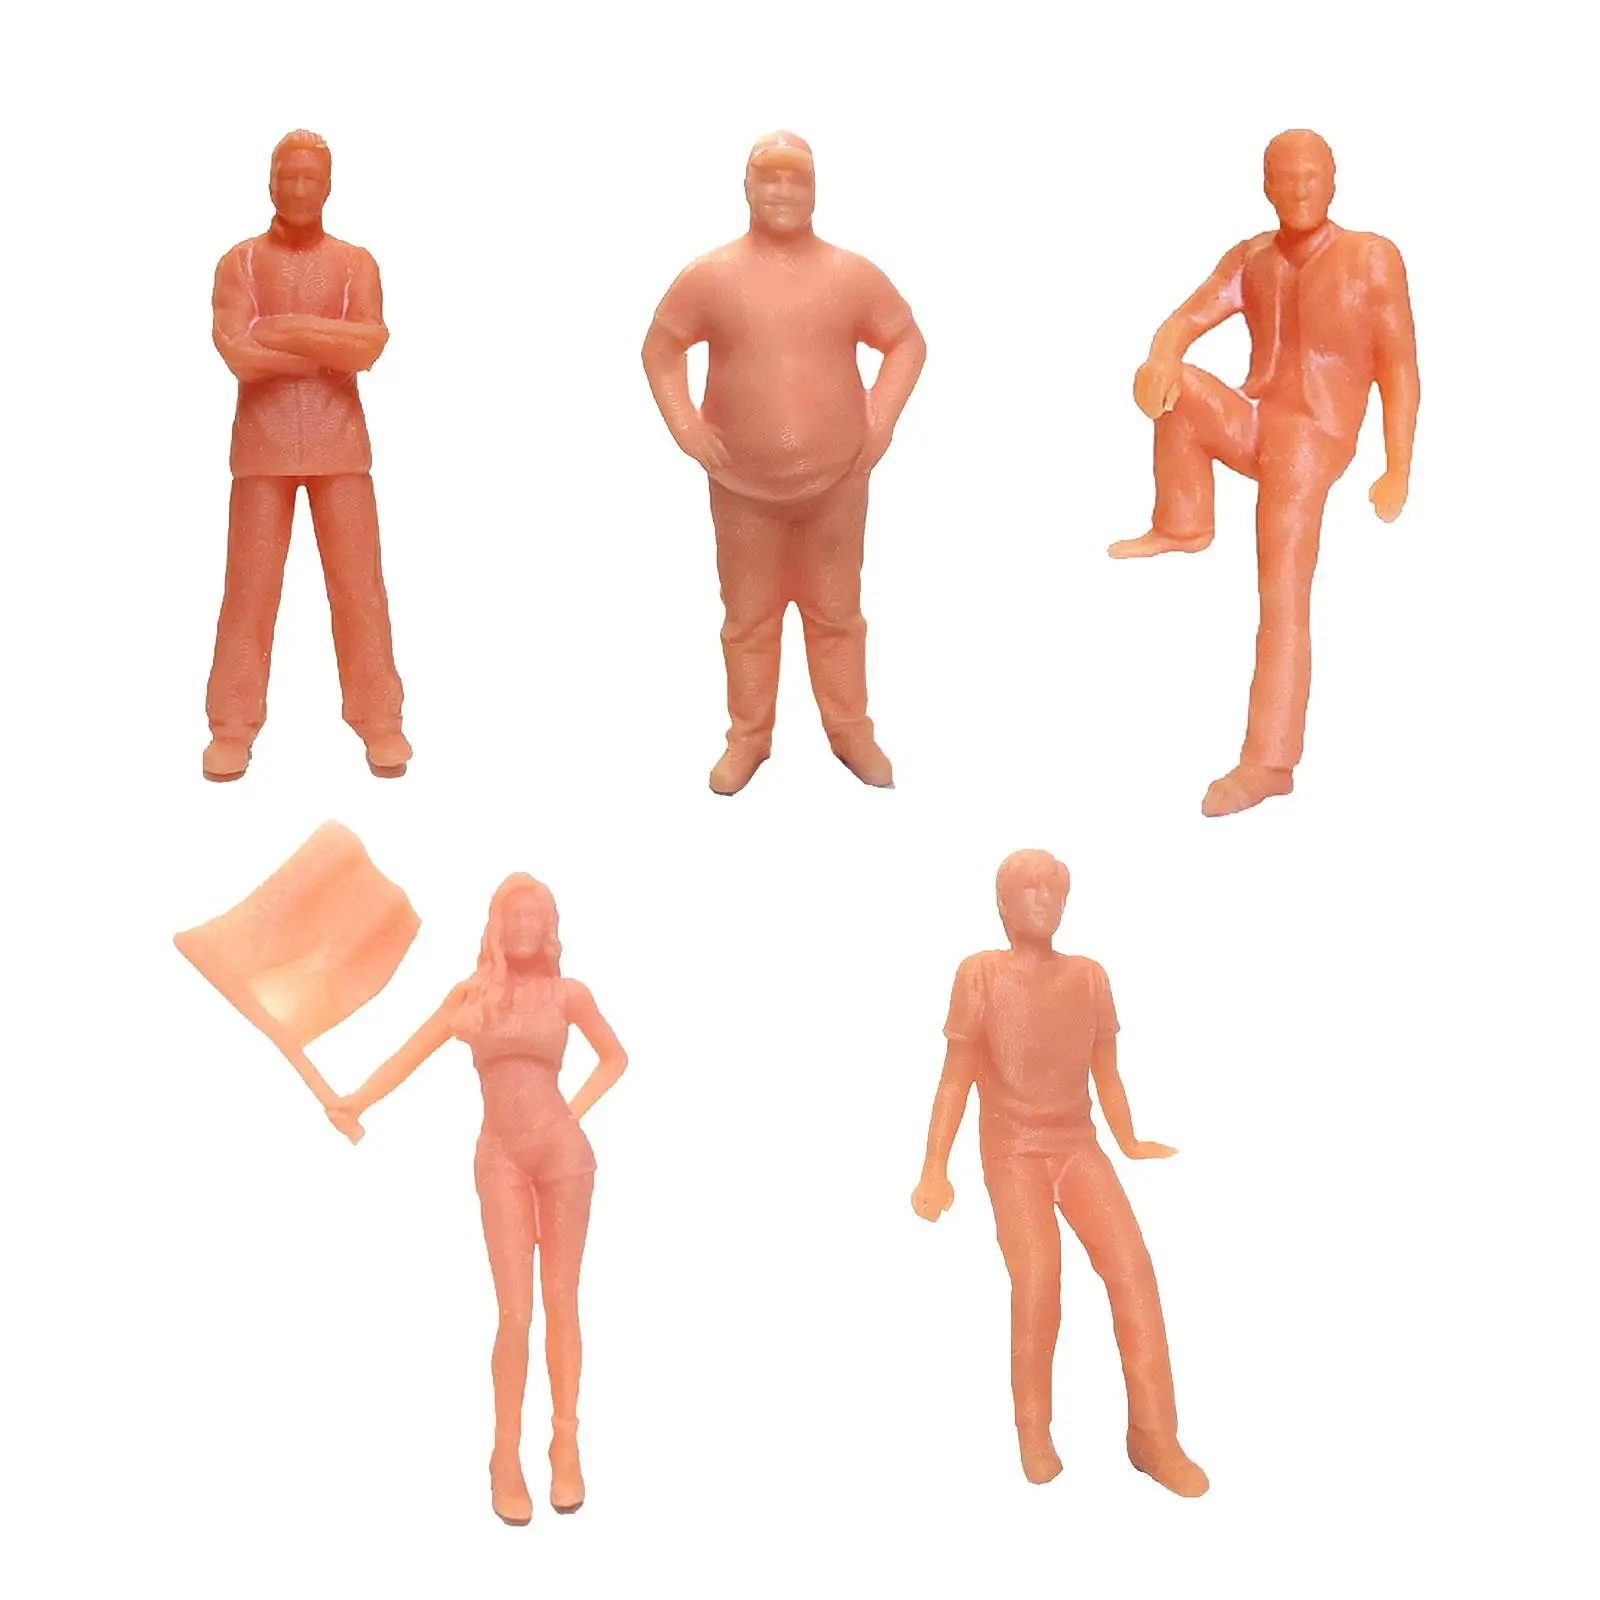 5 Pieces 1:64 Figure Model Set Assorted Poses small people Figures Model Trains Architectural for DIY Scenery Sand Table Decor